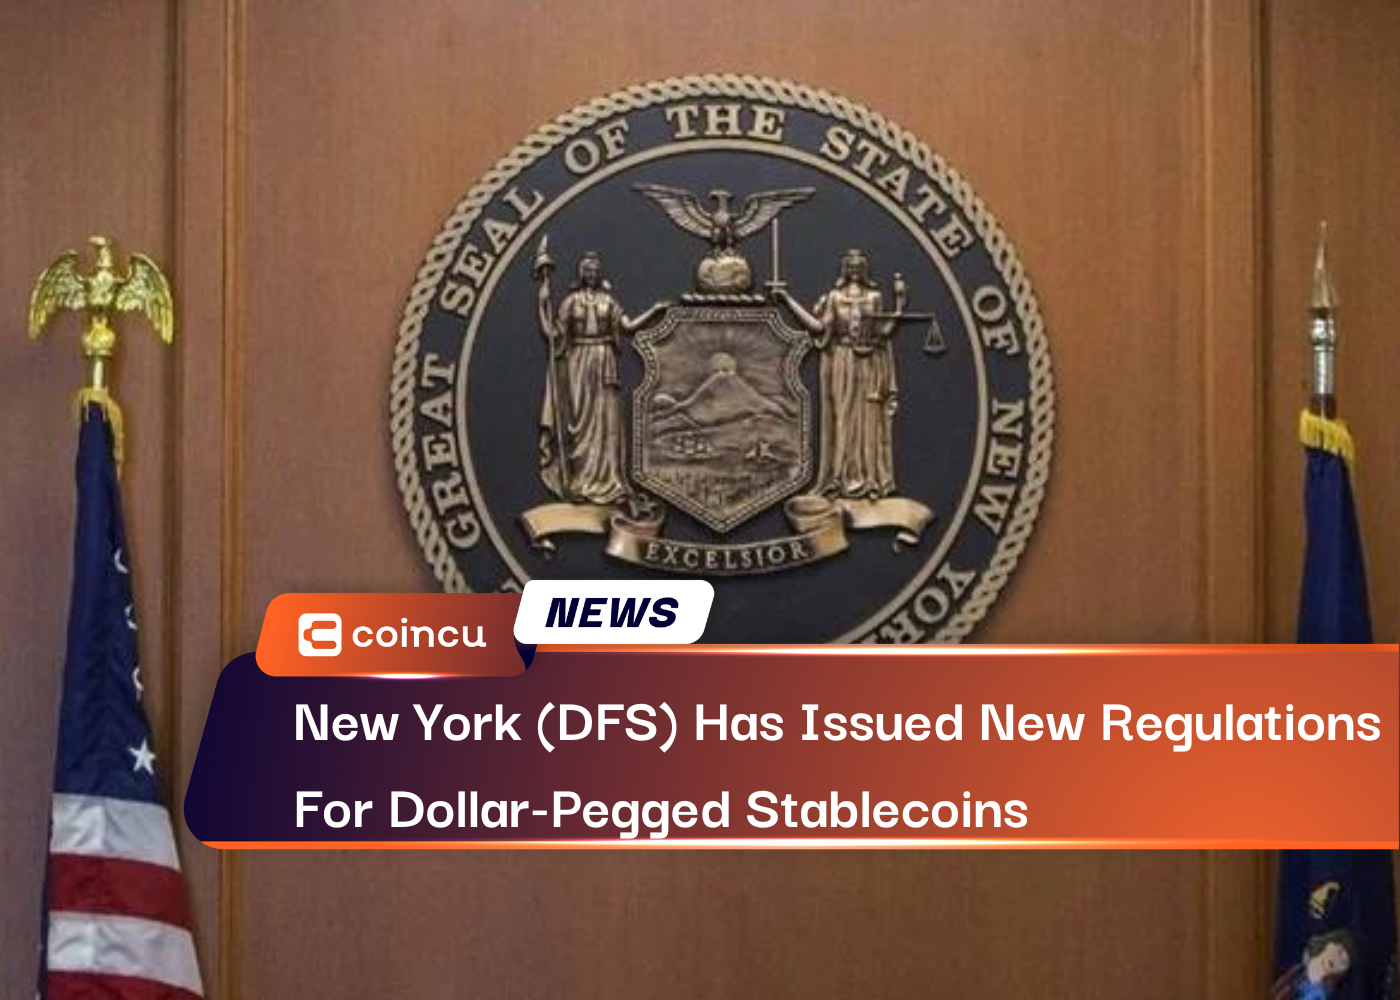 New York DFS Has Issued New Regulations For Dollar Pegged Stablecoins